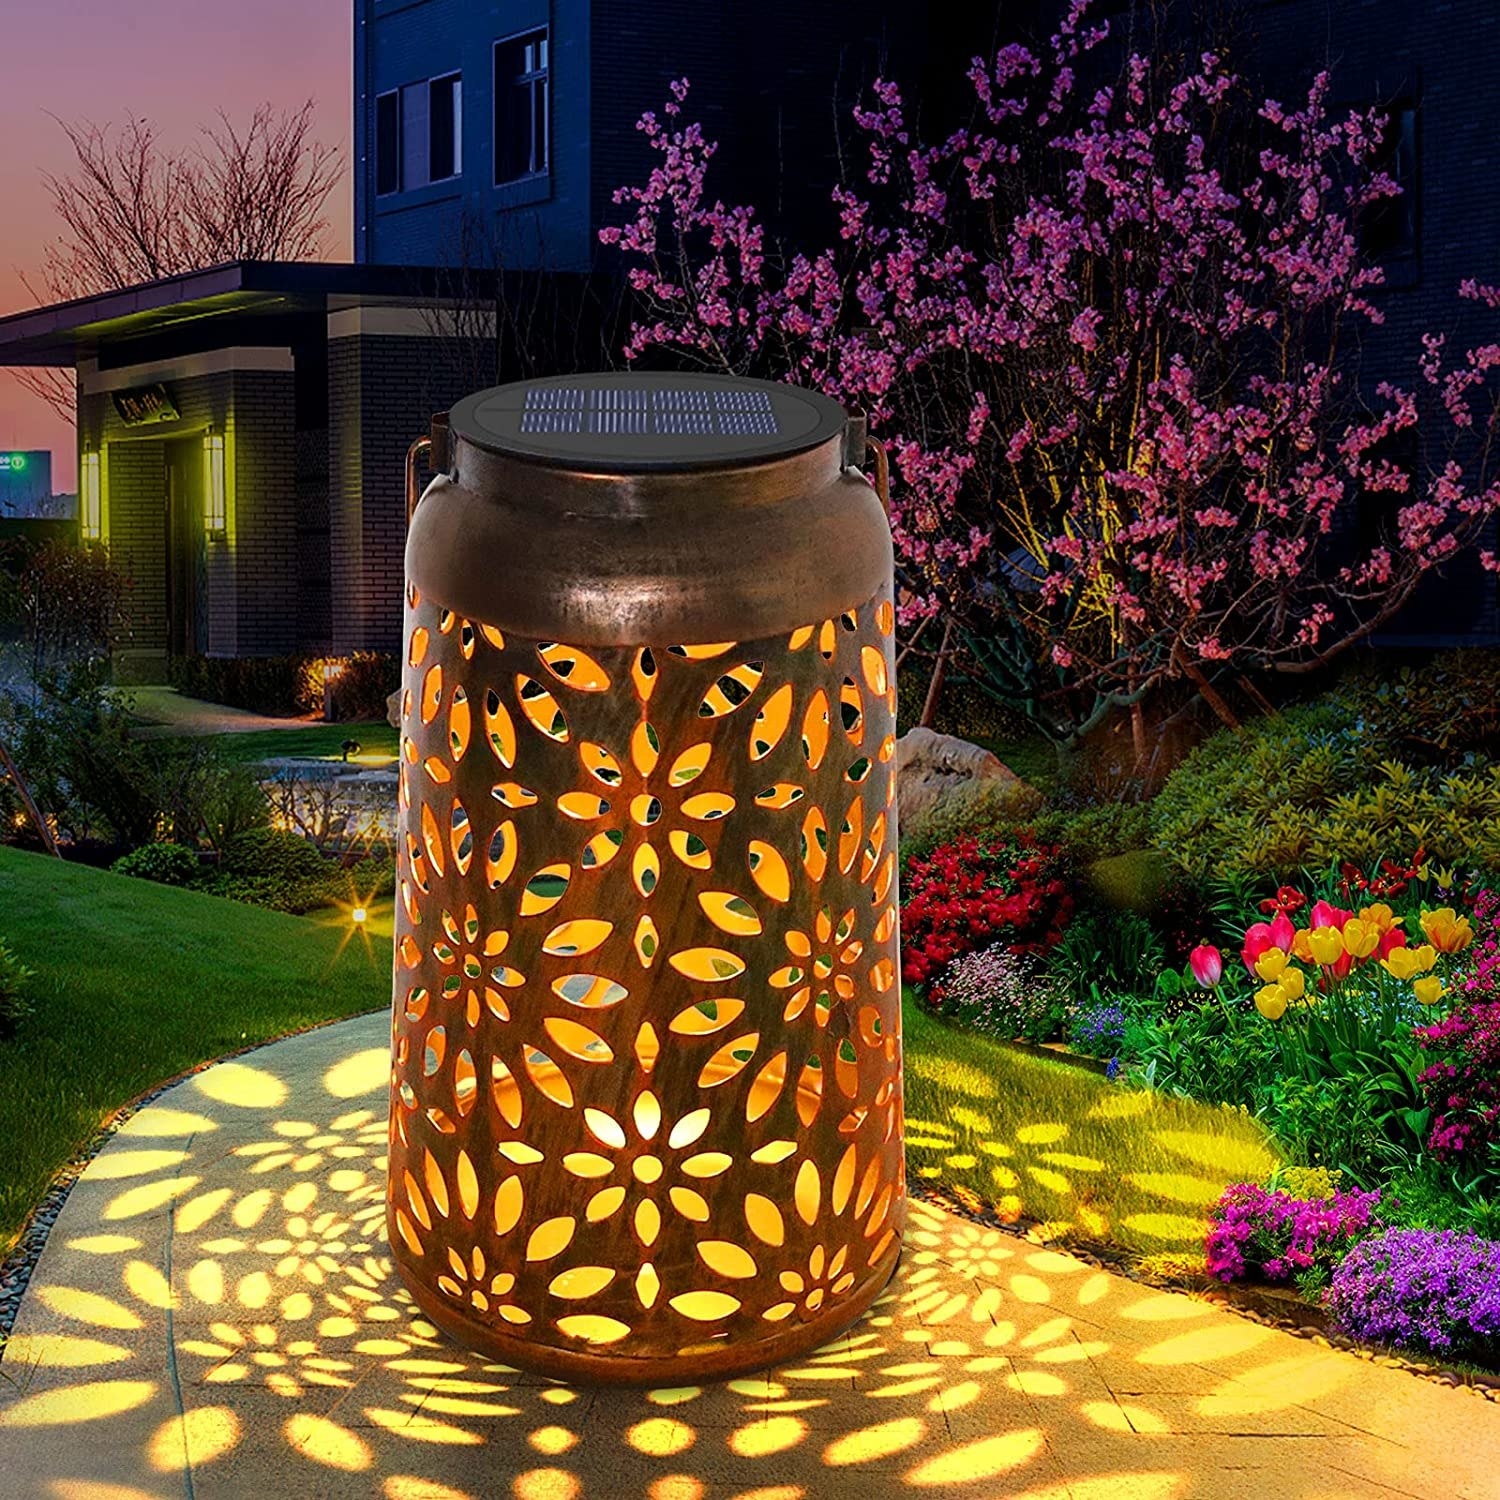 the lantern lit up at night with the pattern on the ground